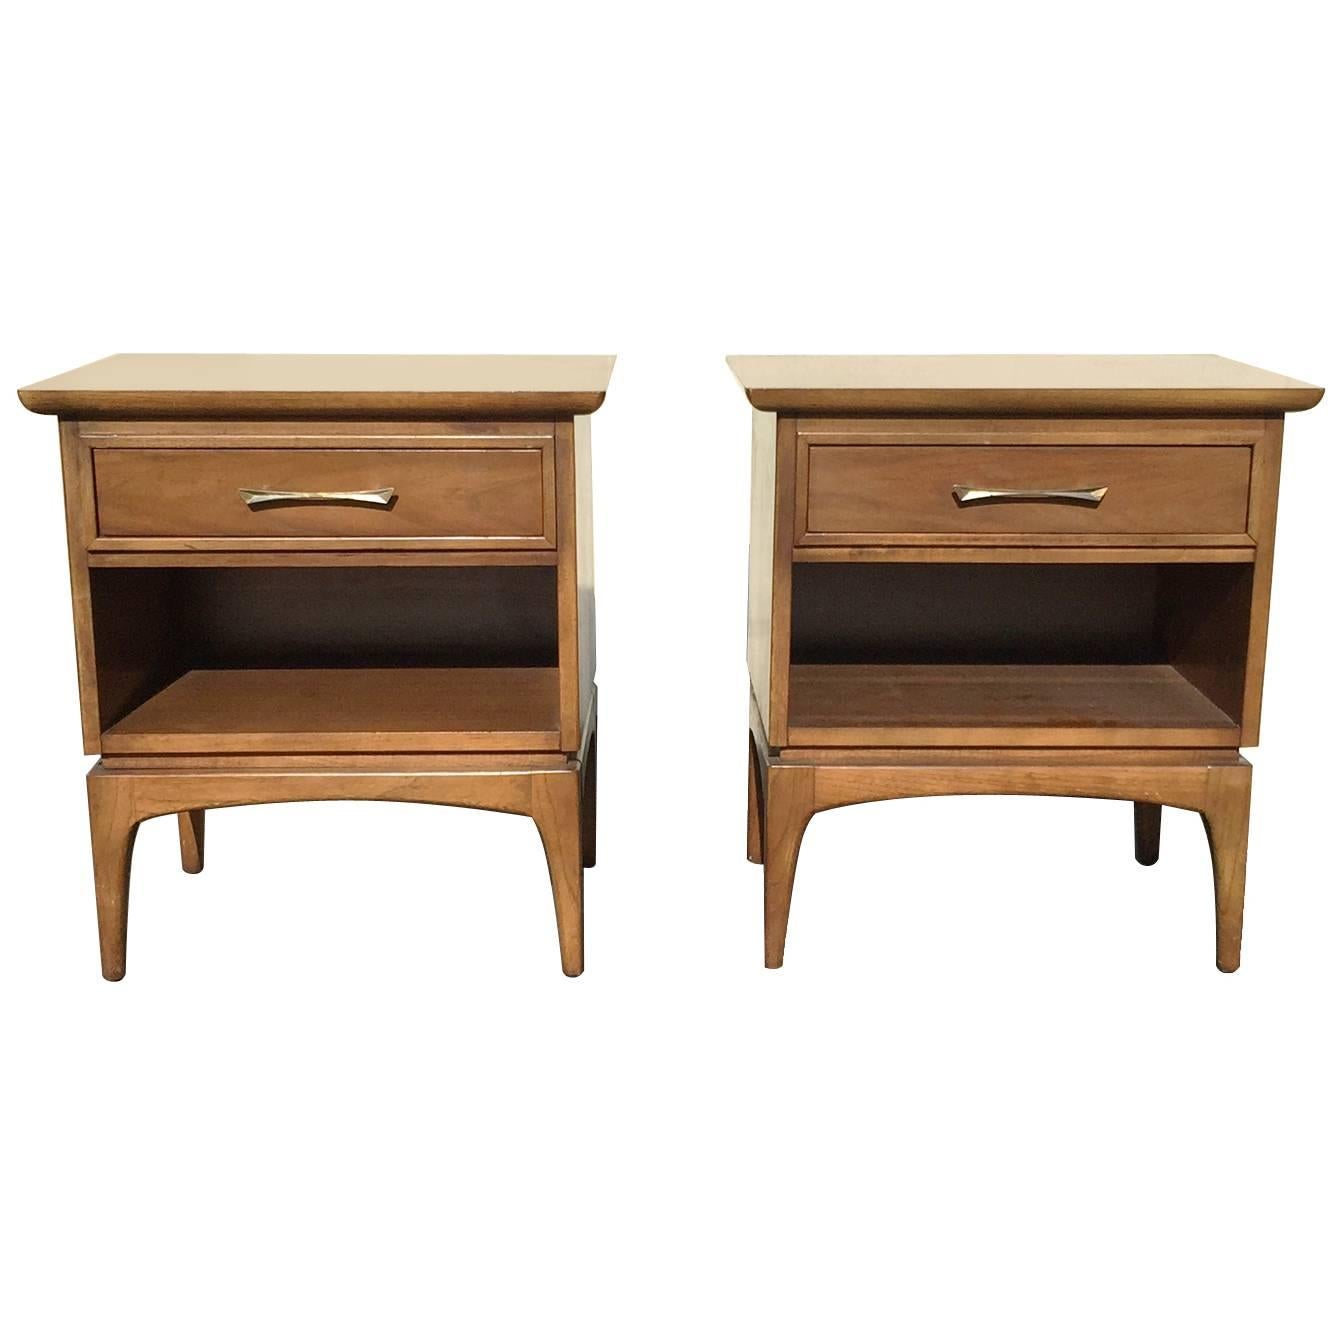 Kent Coffey "The Wharton" Nightstands For Sale